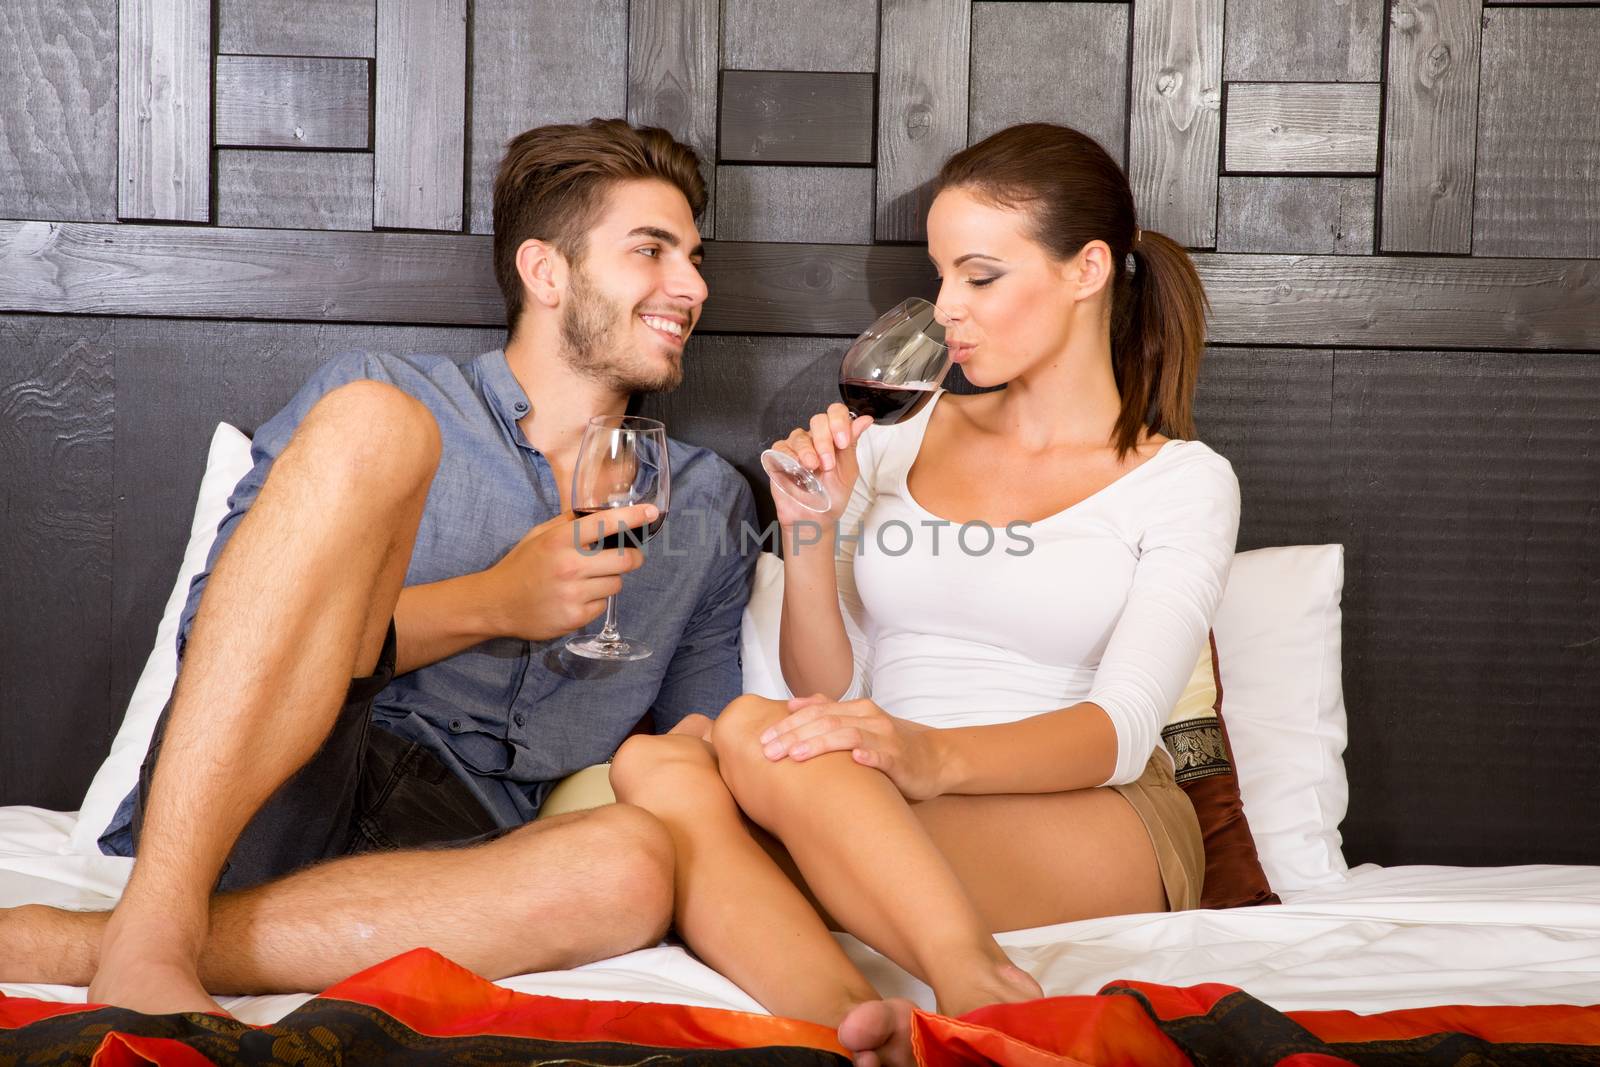 A happy young couple on their vacations with a glass of wine lying on the bed in an asian style hotel room.
